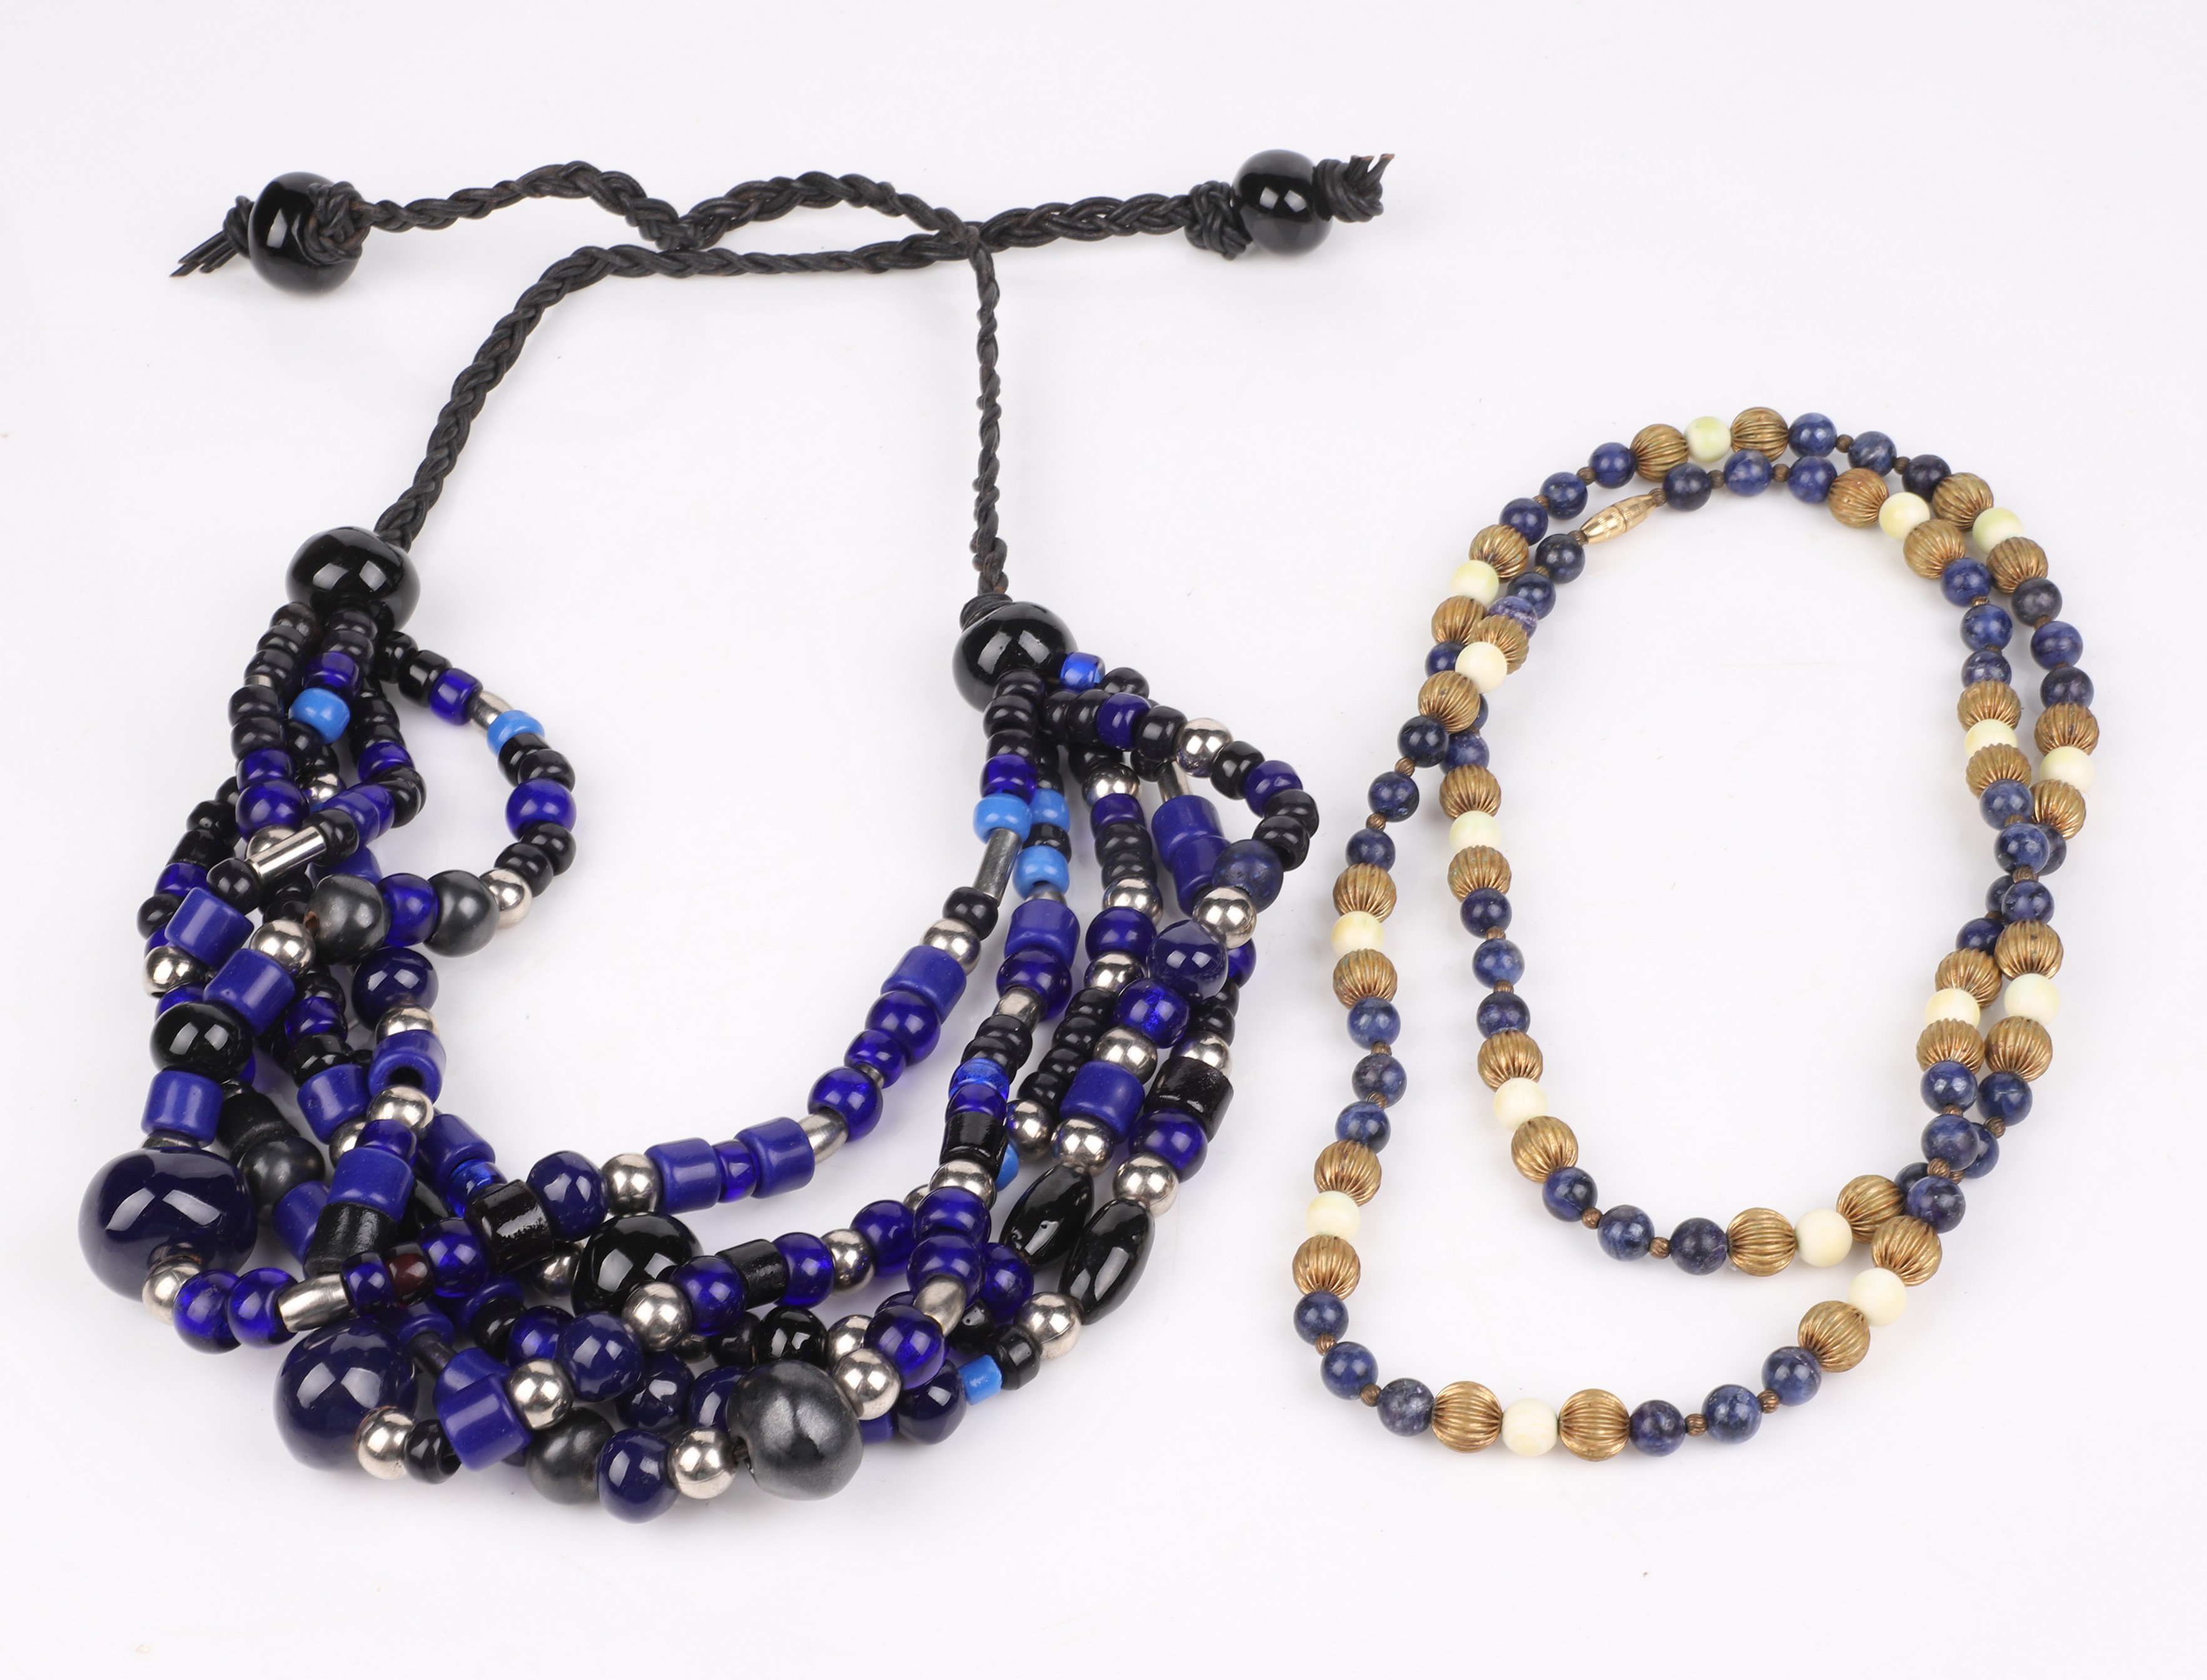  2 Beaded necklaces to include 27a763